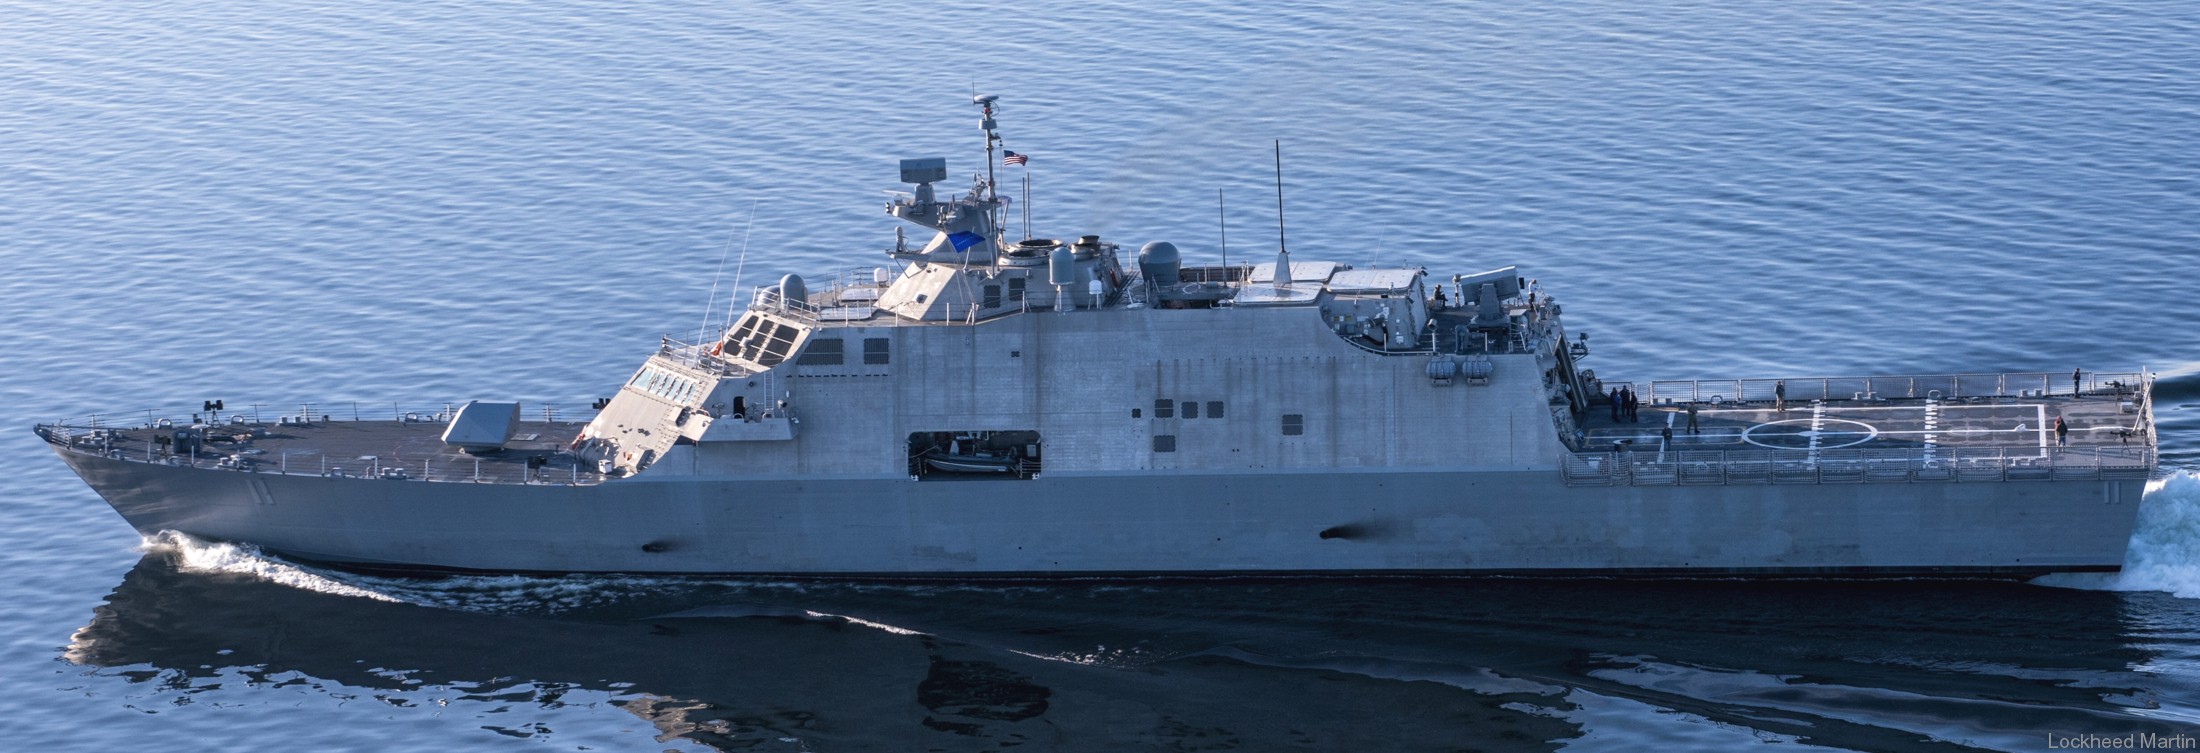 lcs-11 uss sioux city freedom class littoral combat ship us navy 20